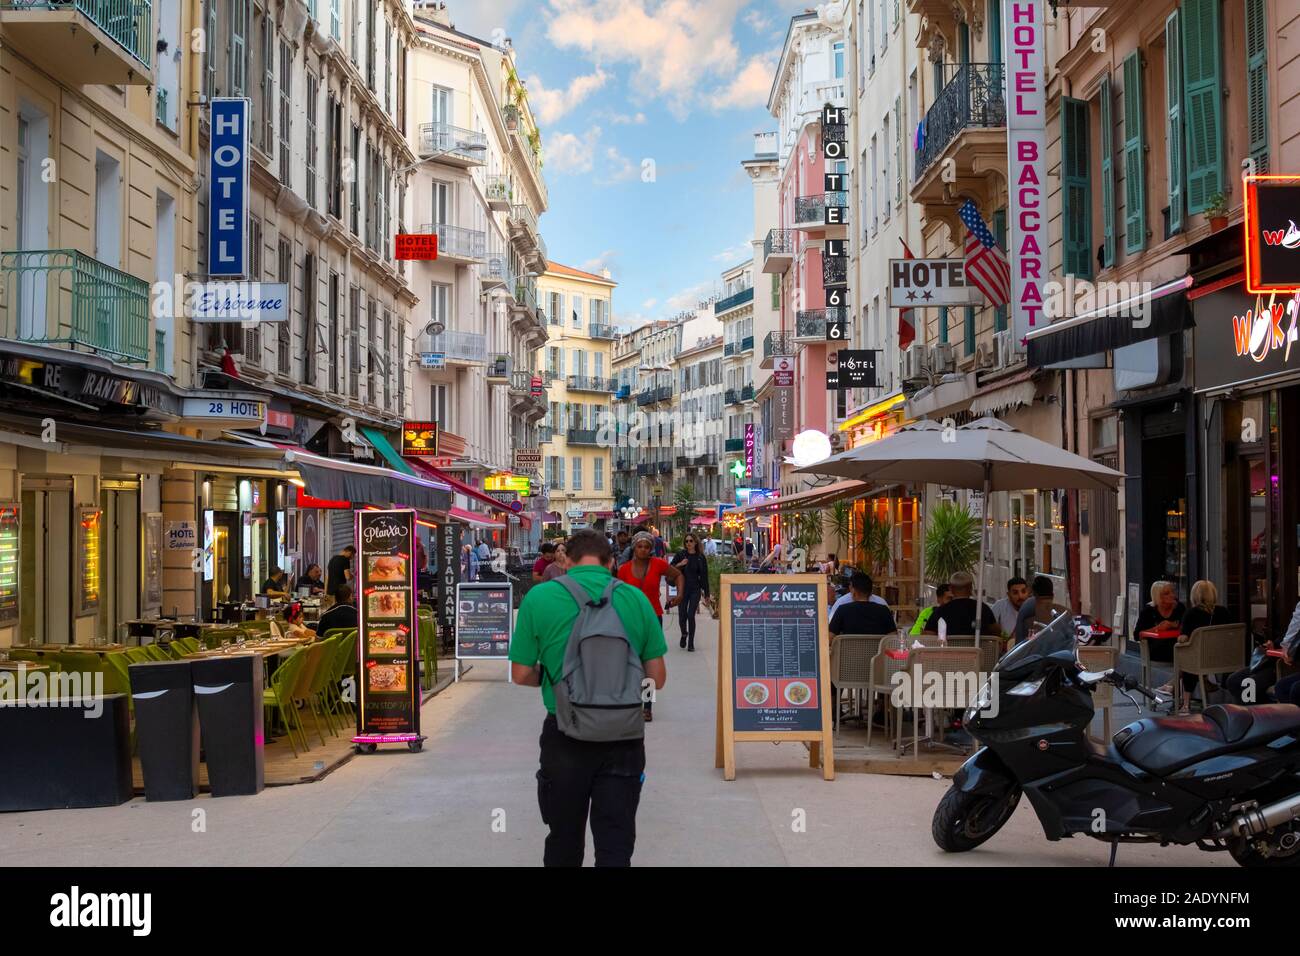 French citizens and tourists walk through a colorful, narrow alley of shops, hotels and cafes as the lights come on at dusk in Nice, France. Stock Photo